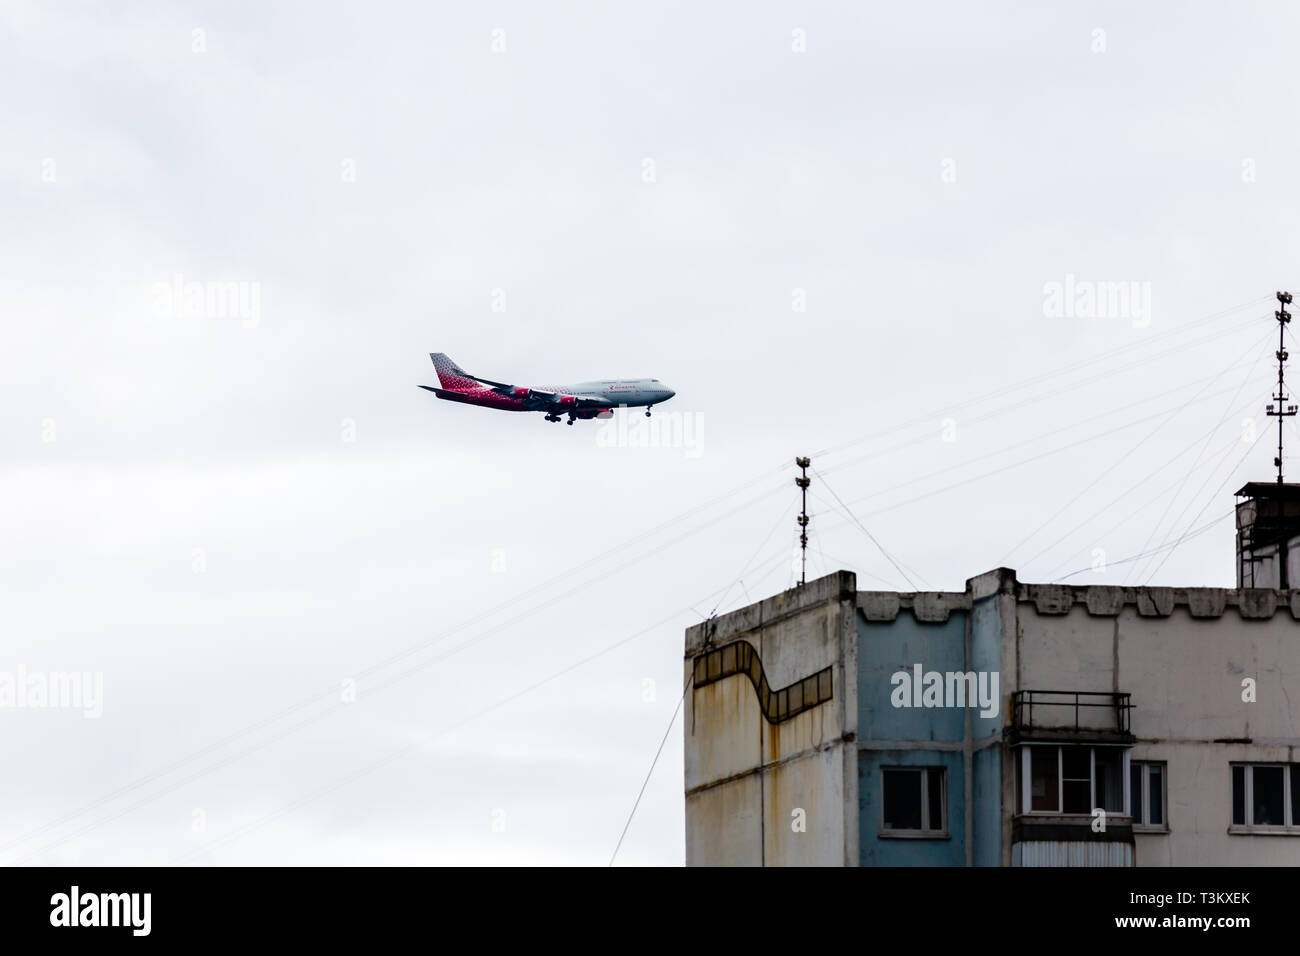 Moscow, Russia - July 8, 2016: Russia Boeing 737 took off from Vnukovo airport. Airplane ascends in the sky above the house Stock Photo